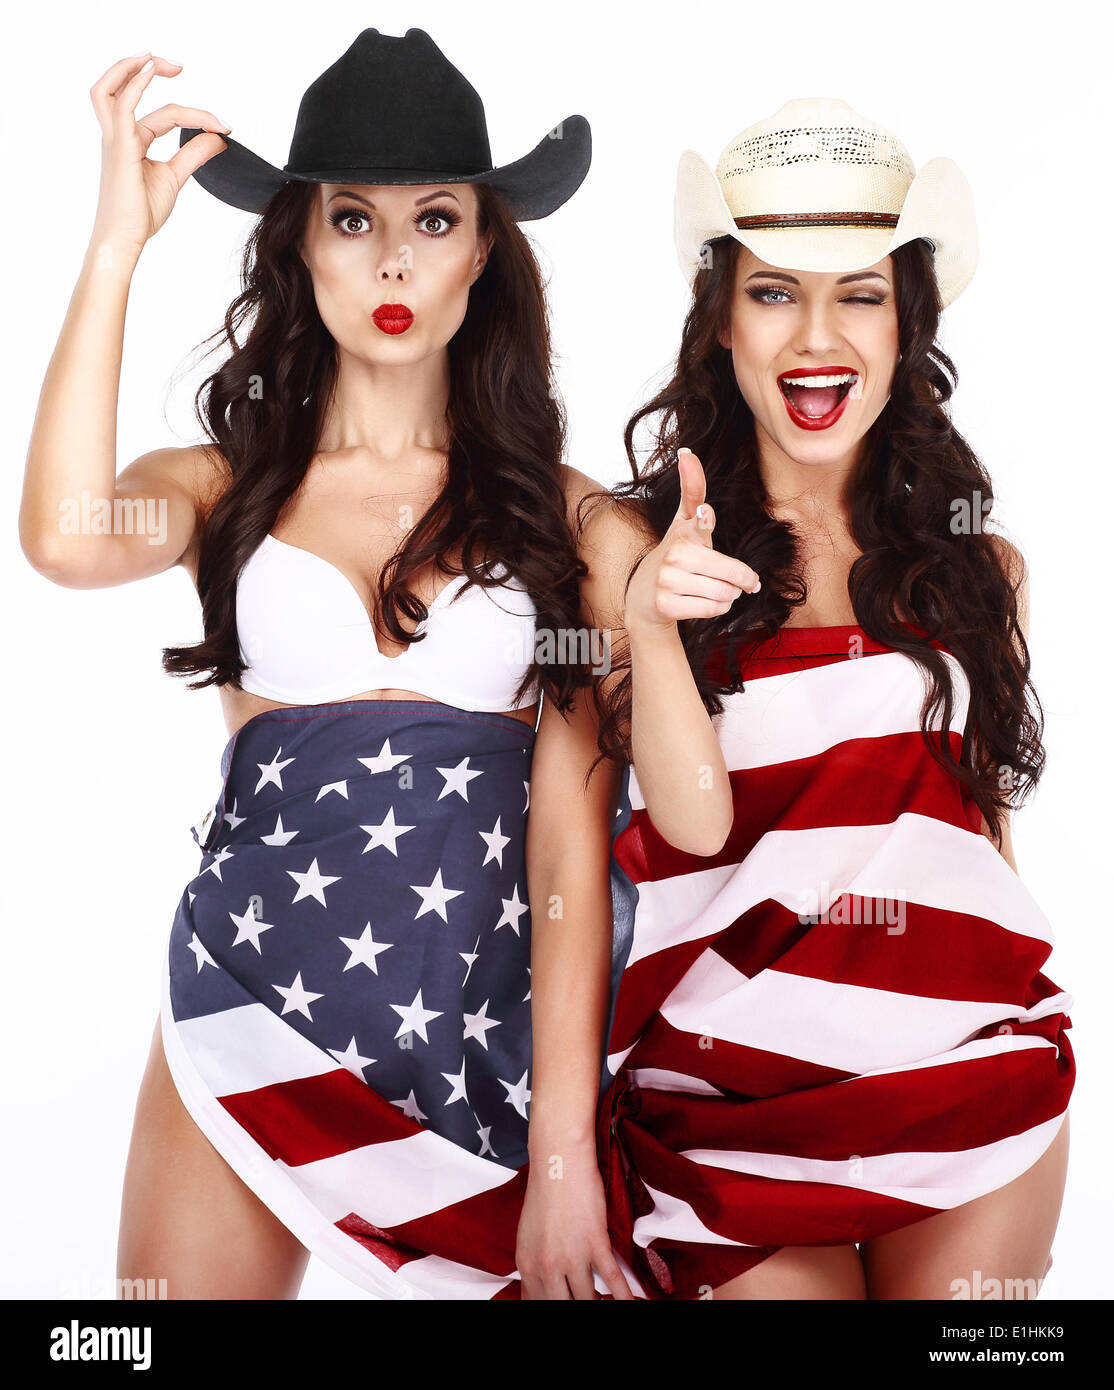 Two Ecstatic Showy Women Wrapped in USA Flag Stock Photo